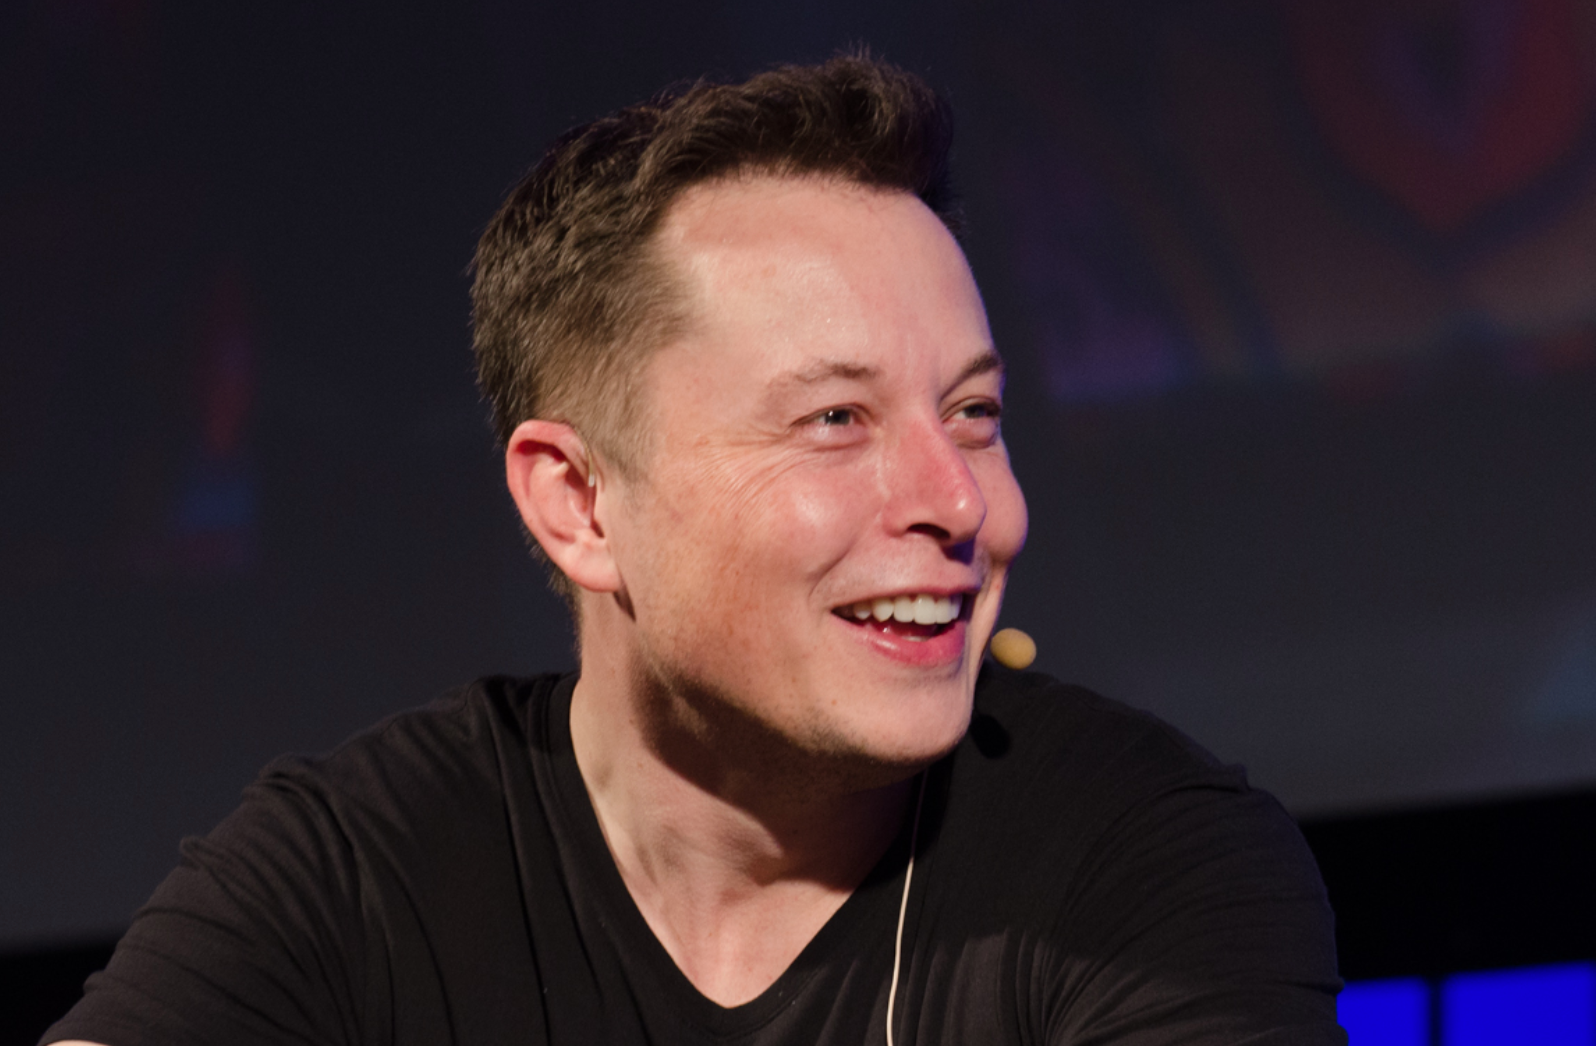 Elon Musk Suggests Tesla Could Resume Accepting Bitcoin Soon